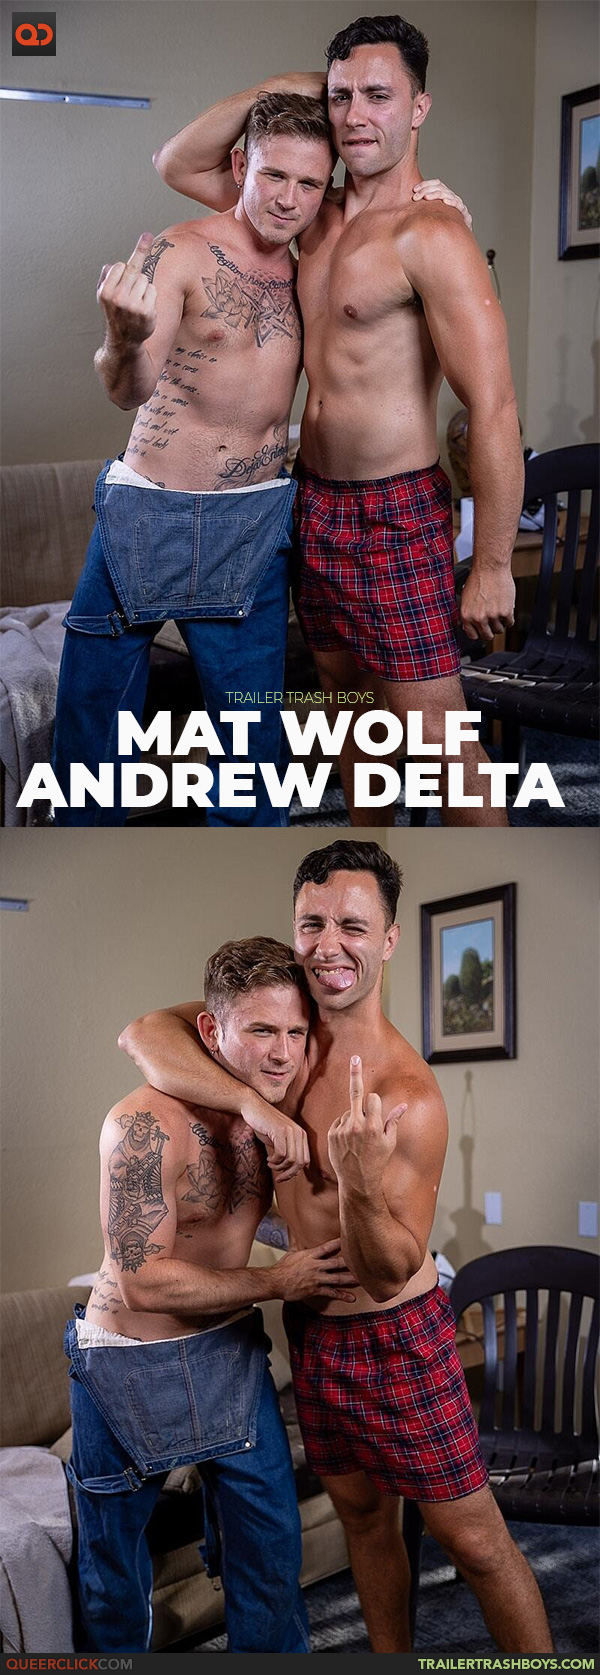 Trailer Trash Boys: Andrew Delta and Mat Wolf